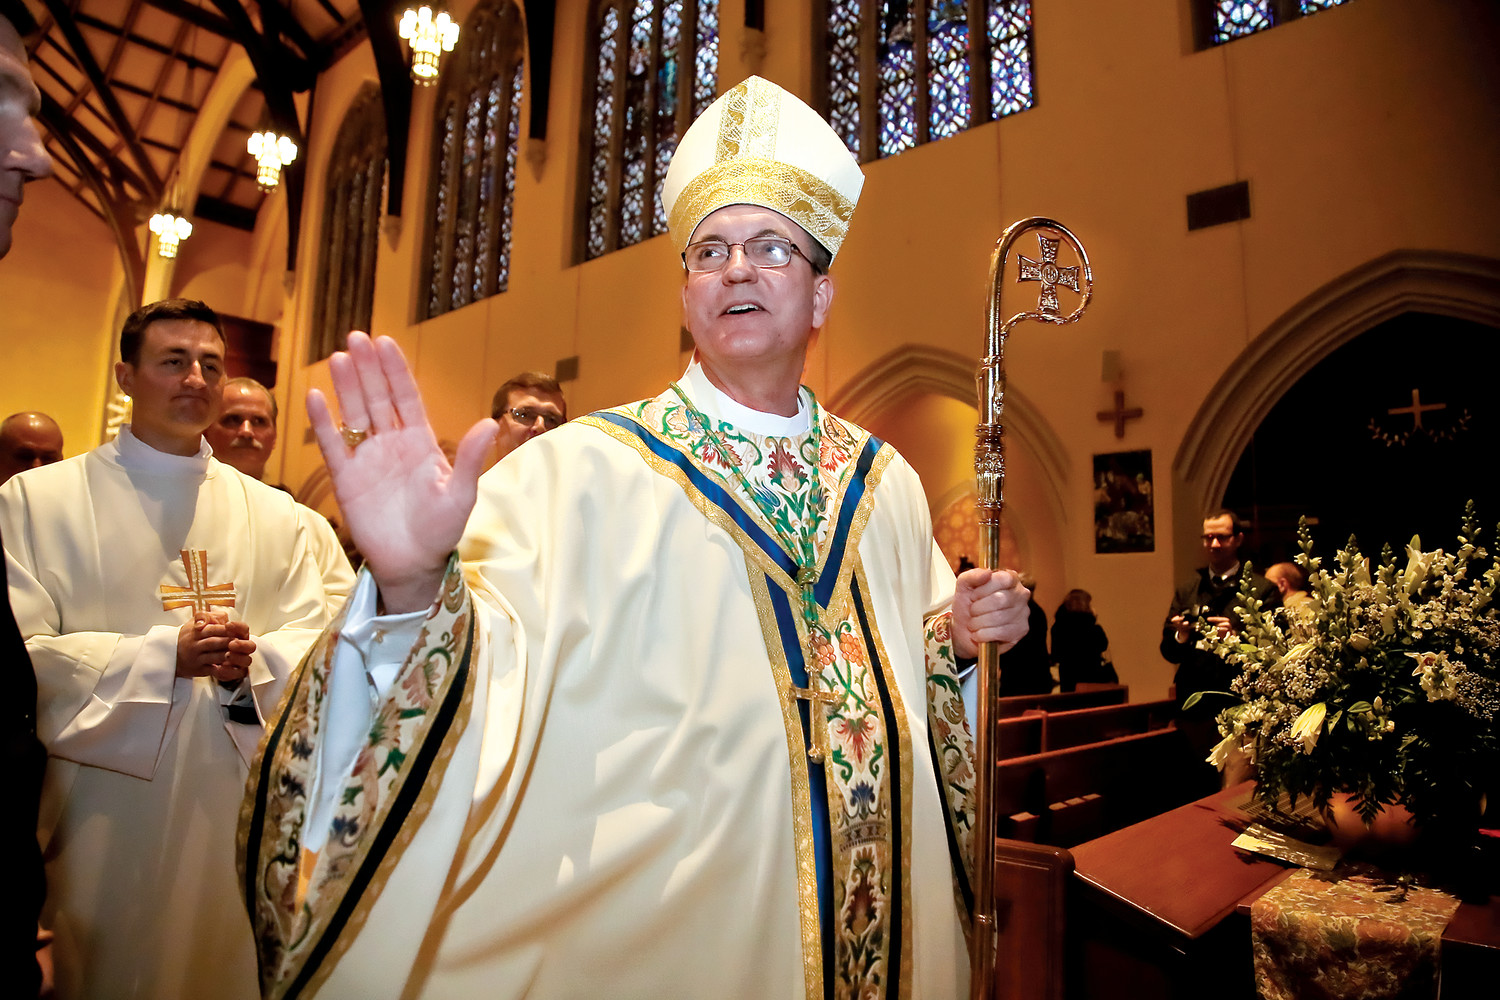 Bishop John O. Barres, installed as the leader of the Diocese of Rockville Centre last year, was named in a report detailing the alleged cover-up of clergy sexual abuse in Pennsylvania. He was bishop of the Diocese of Allentown from 2009 to 2016.